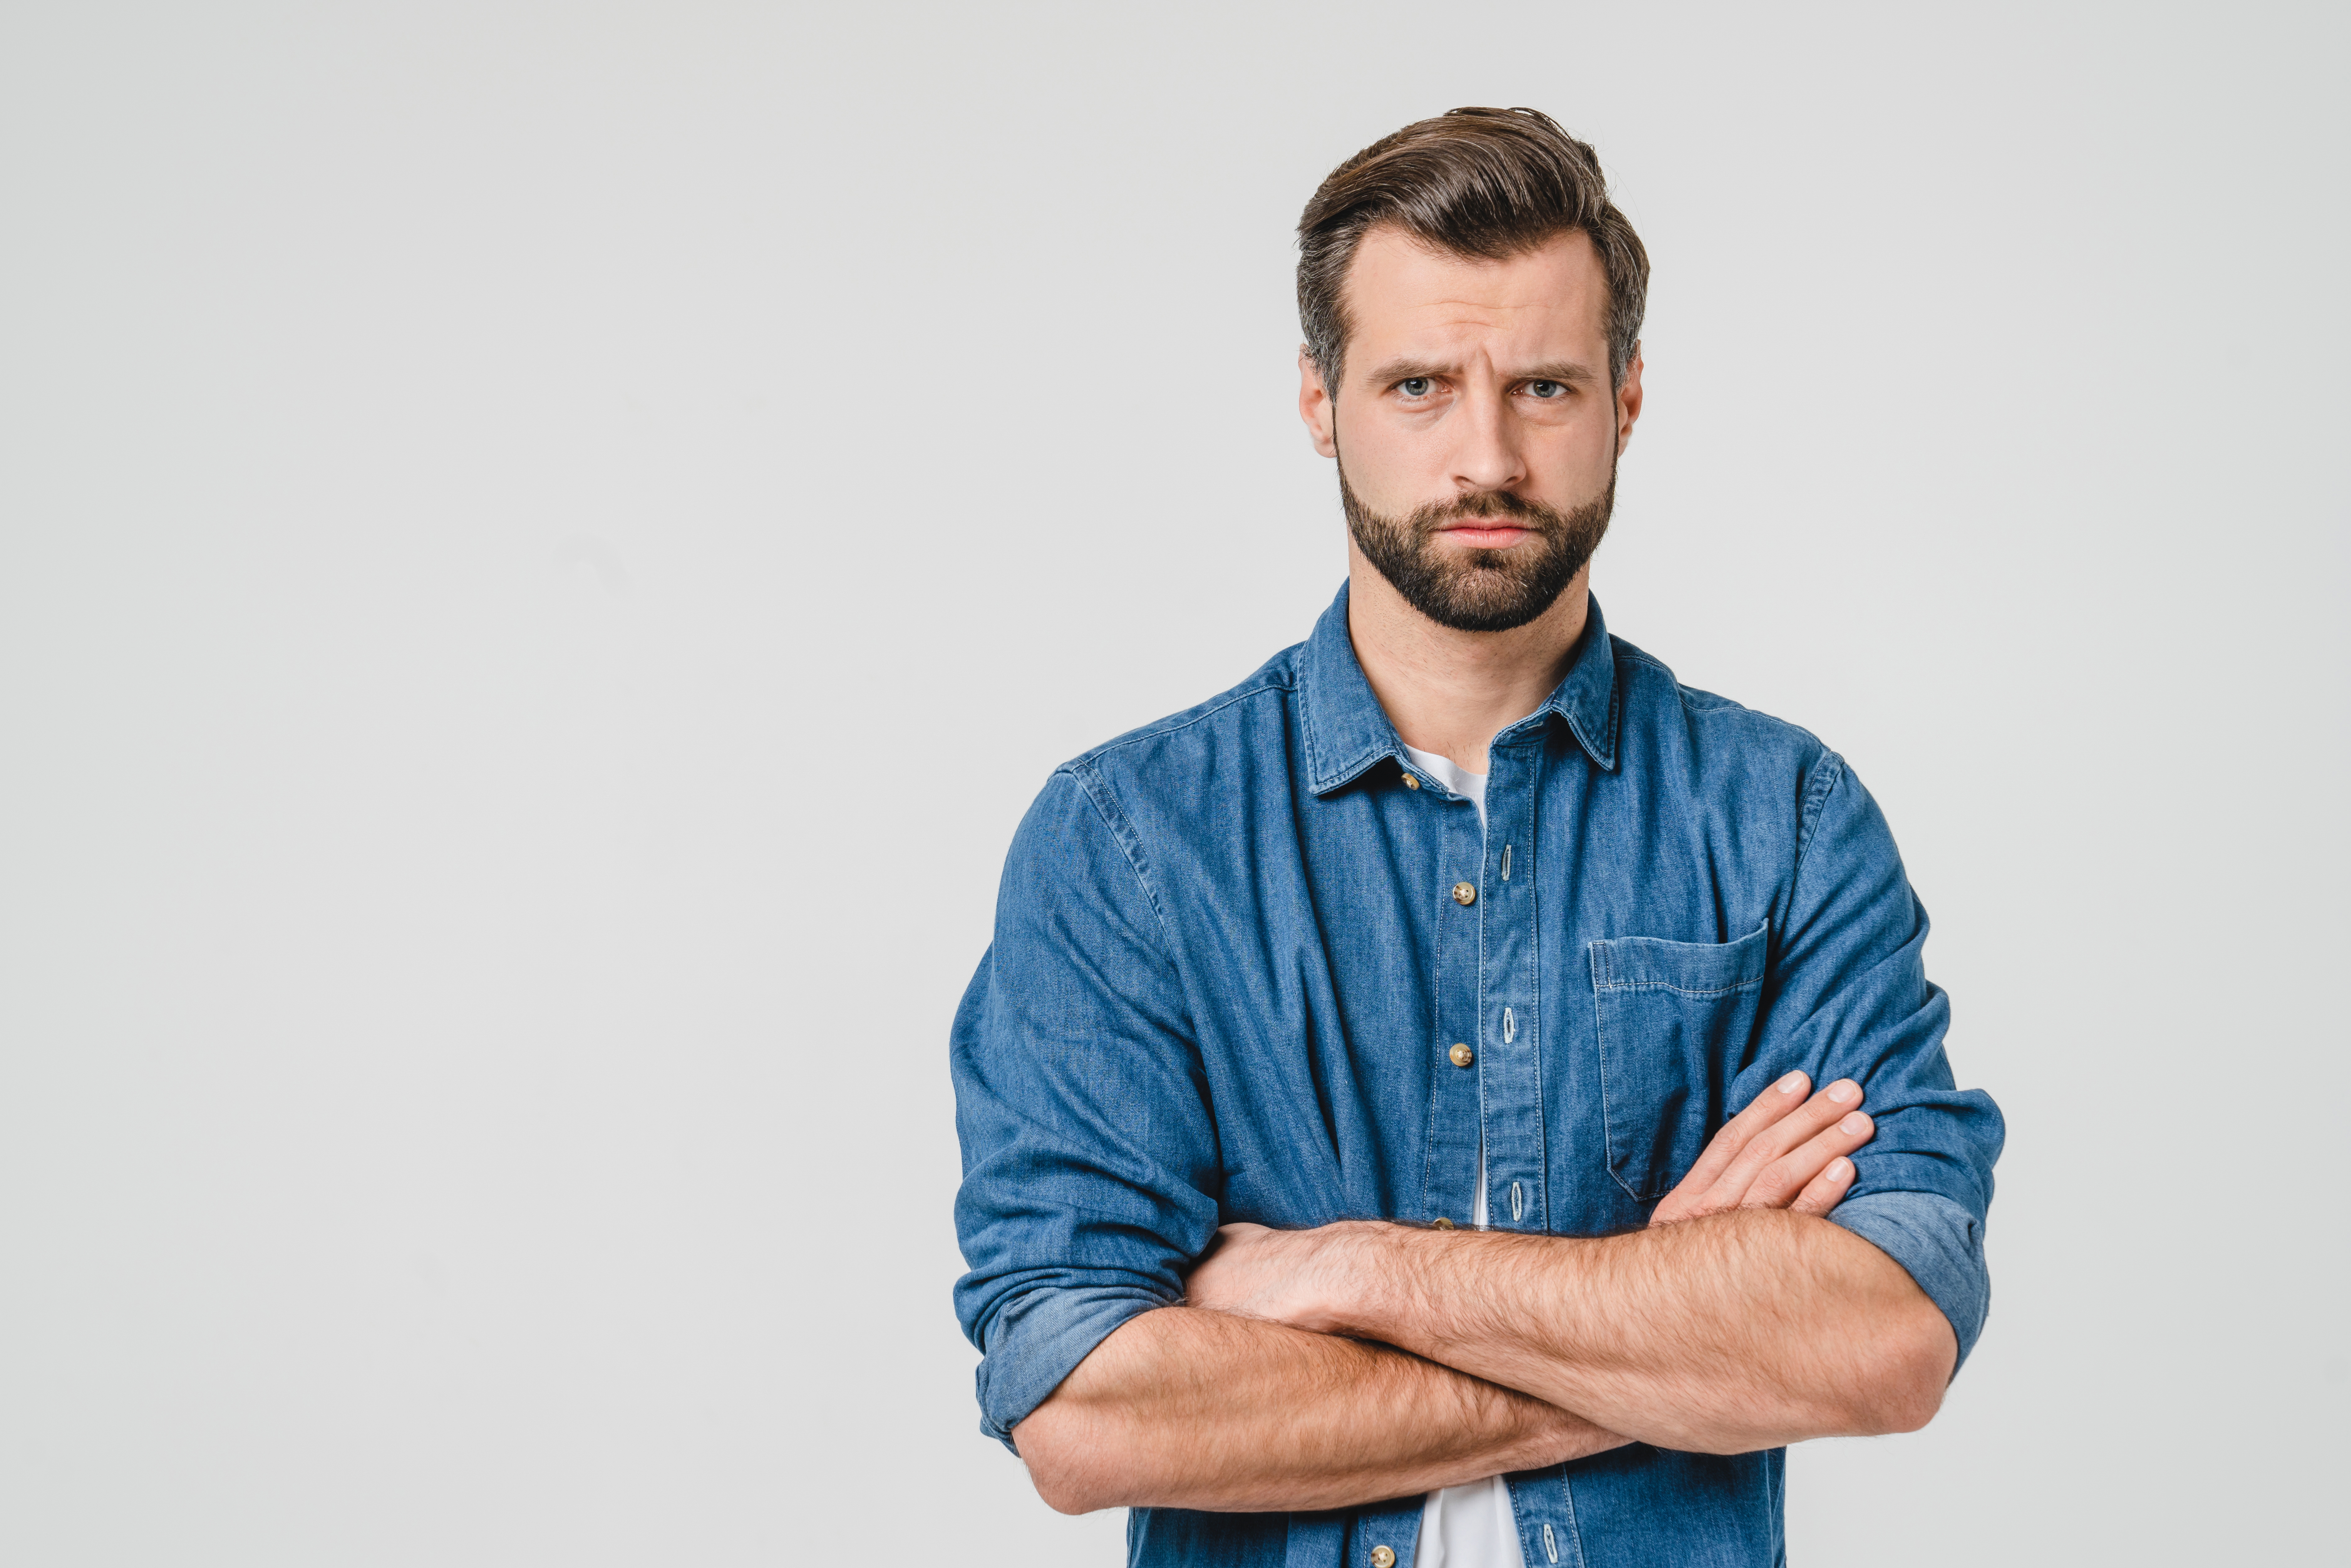 Man with serious face | Shutterstock